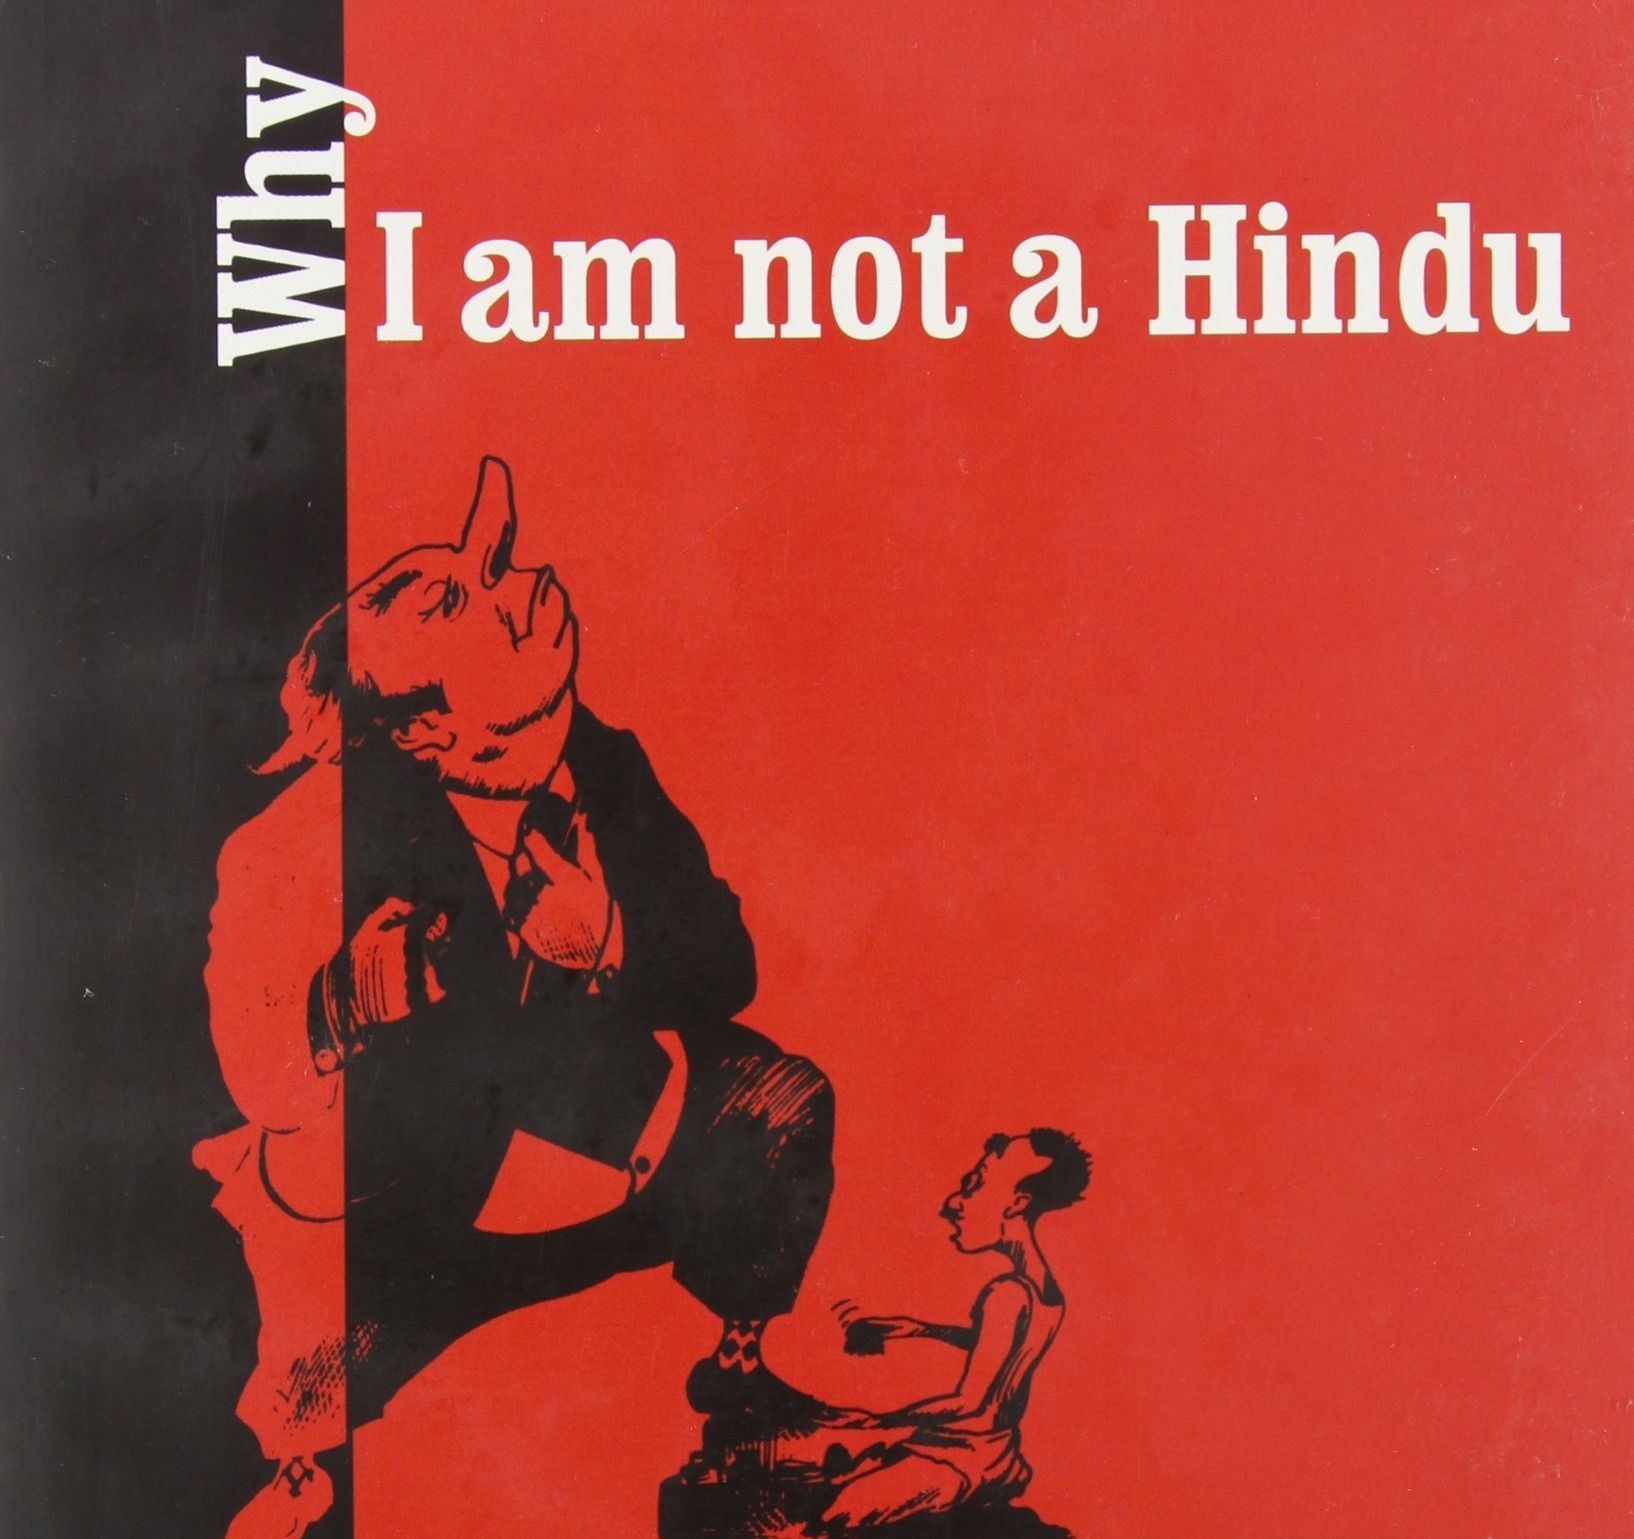 Another Look at India’s Books: Kancha Ilaiah Shepherd’s “Why I Am Not a Hindu”